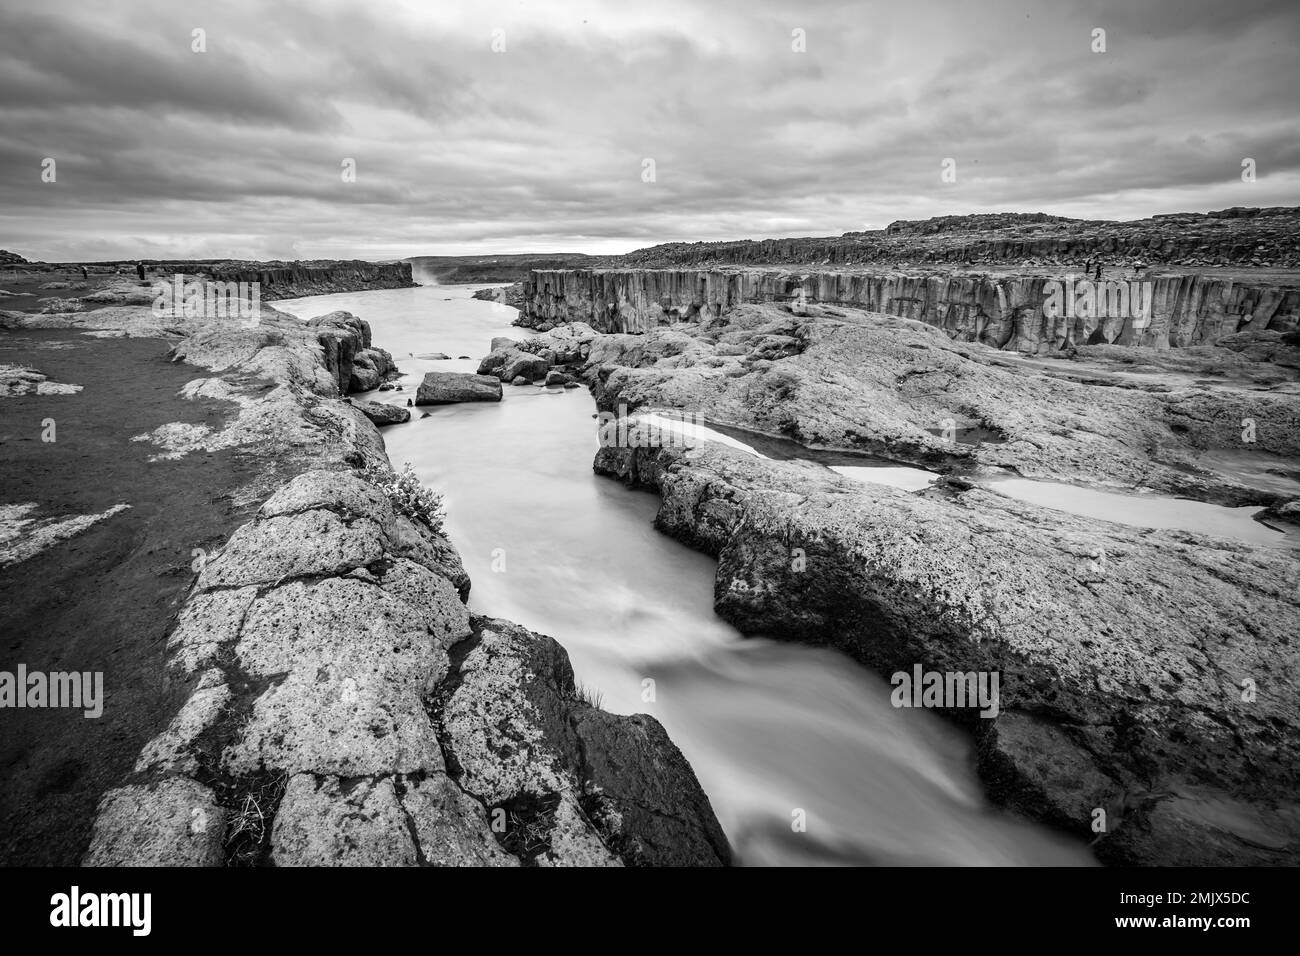 Dettifoss waterfall, Iceland. Black and white abstract long exposure dreamy picture of one of the biggest waterfalls in Europe. Famous landmark Stock Photo